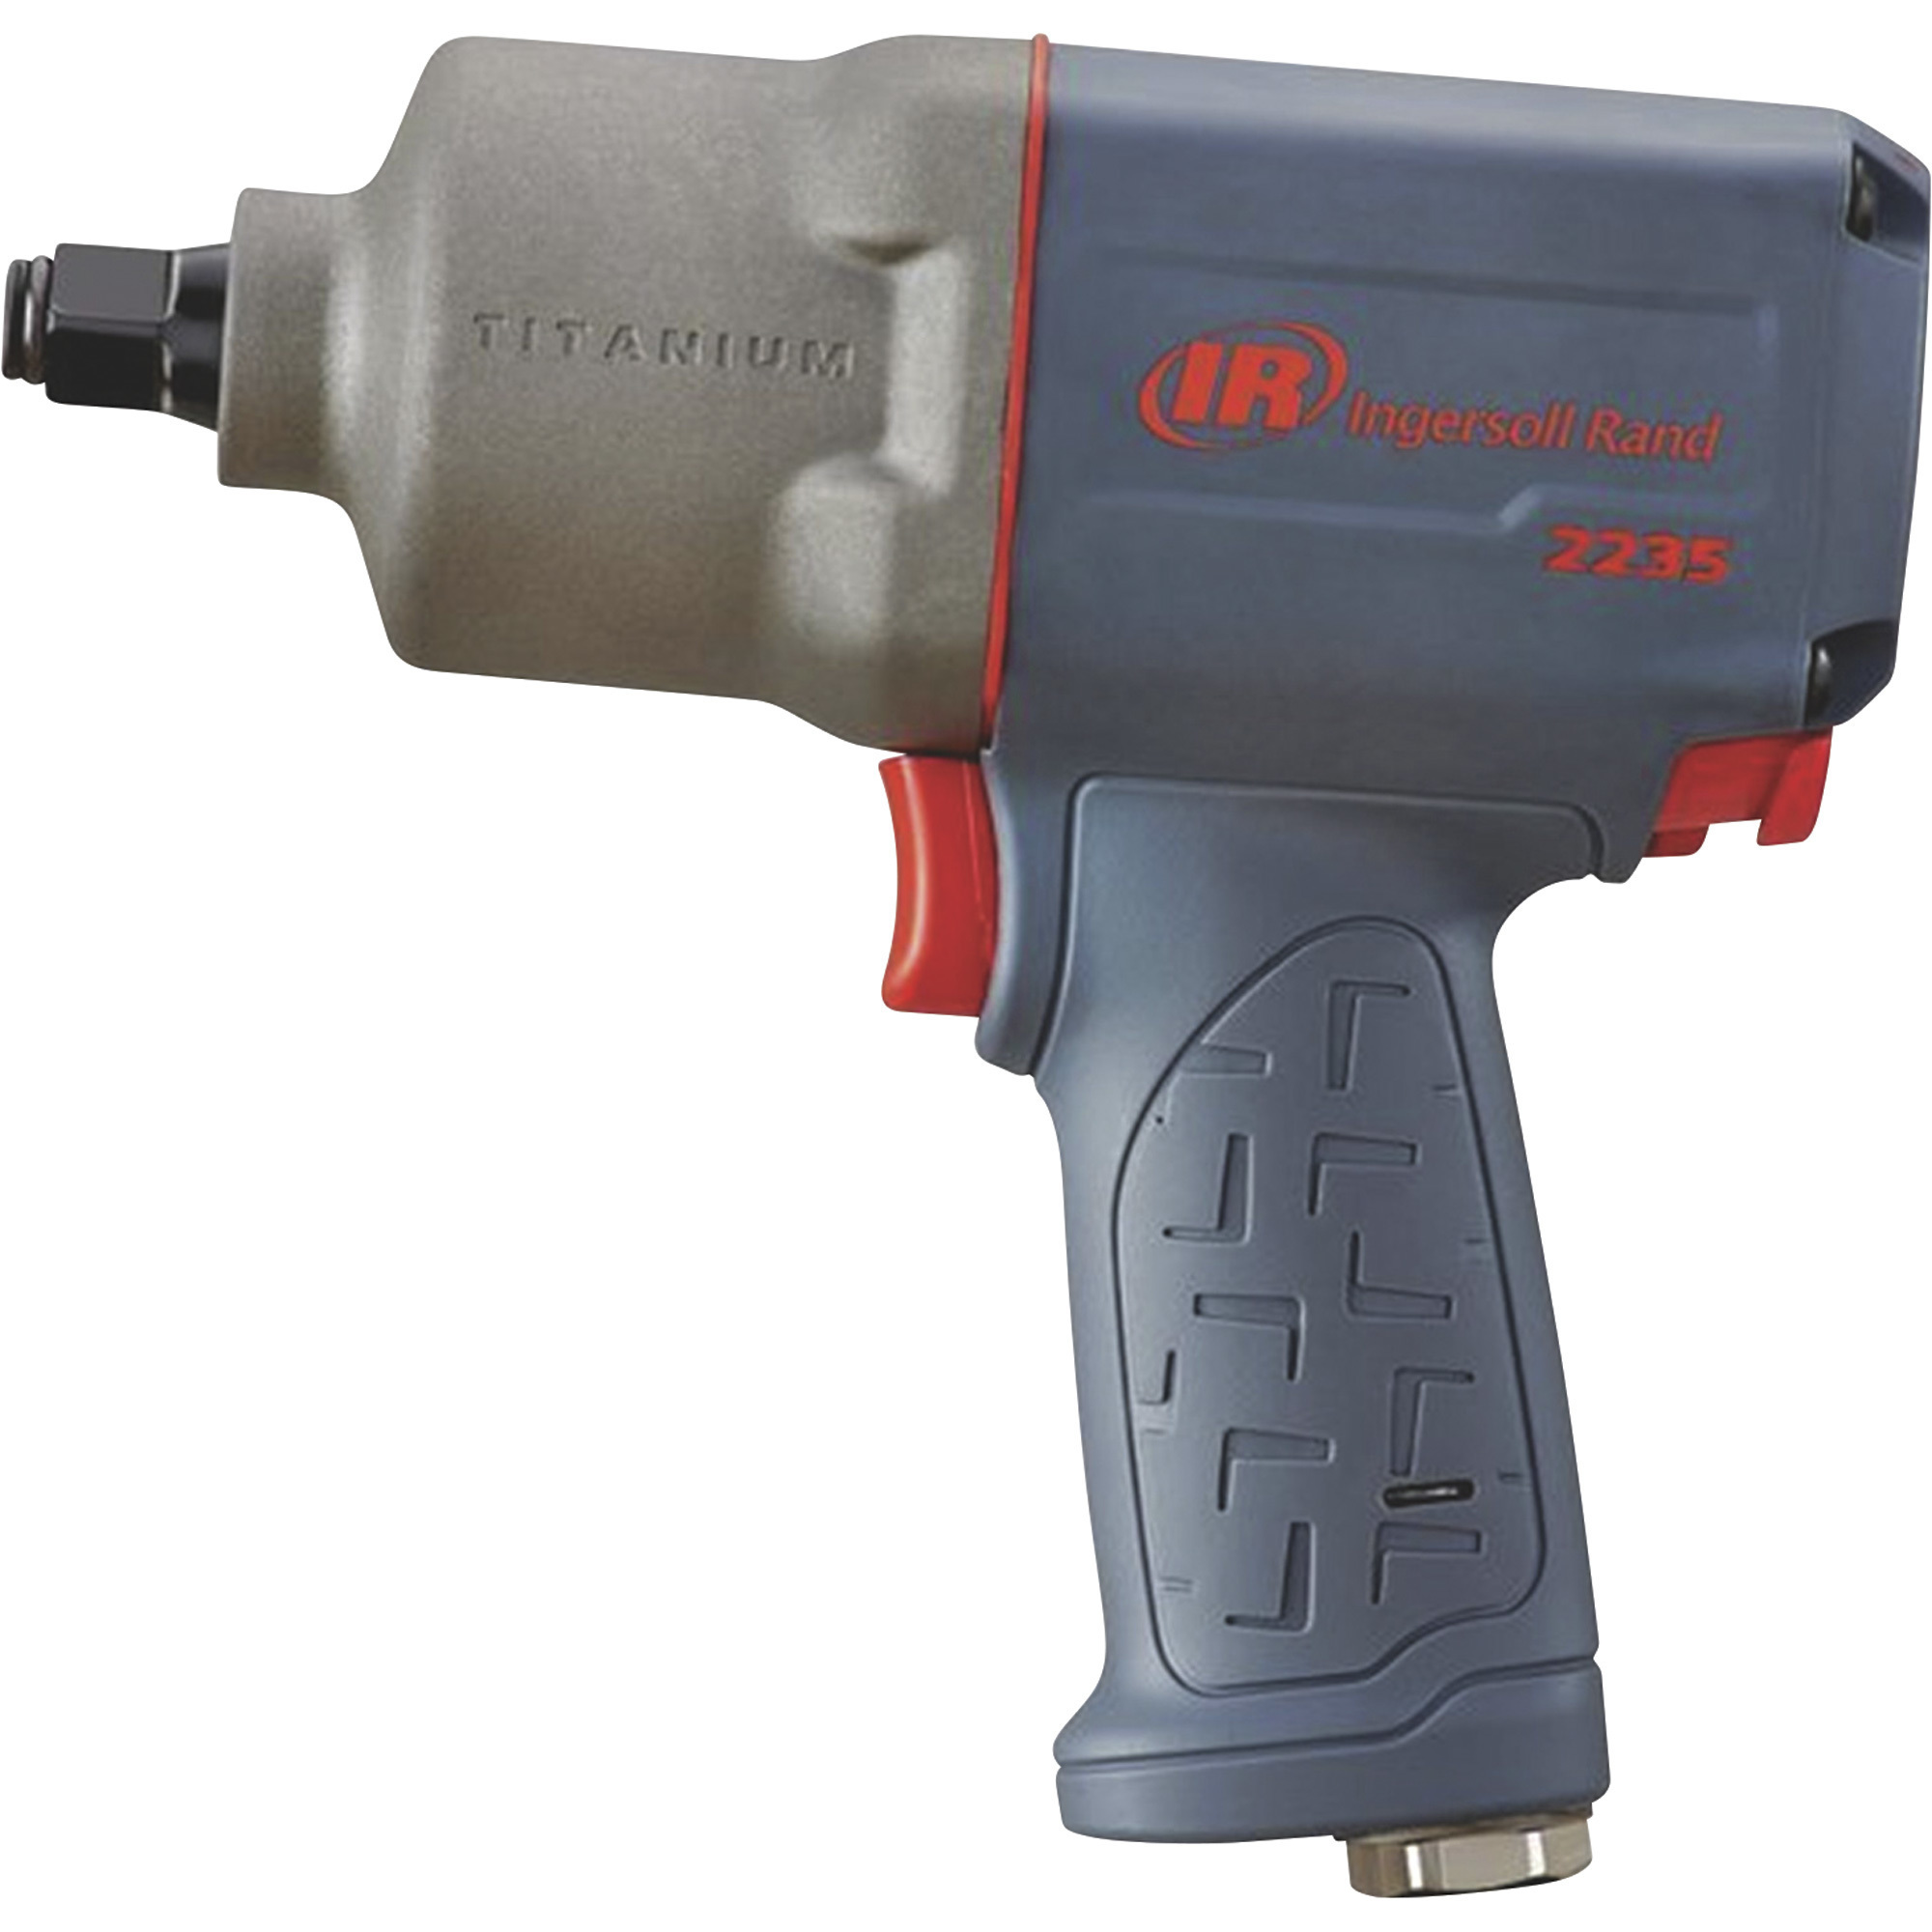 Ingersoll Rand Air Impact Wrench, 1/2in. Drive, 6 CFM, 1350 Ft./Lbs. Max  Torque, Model# 2235TiMax